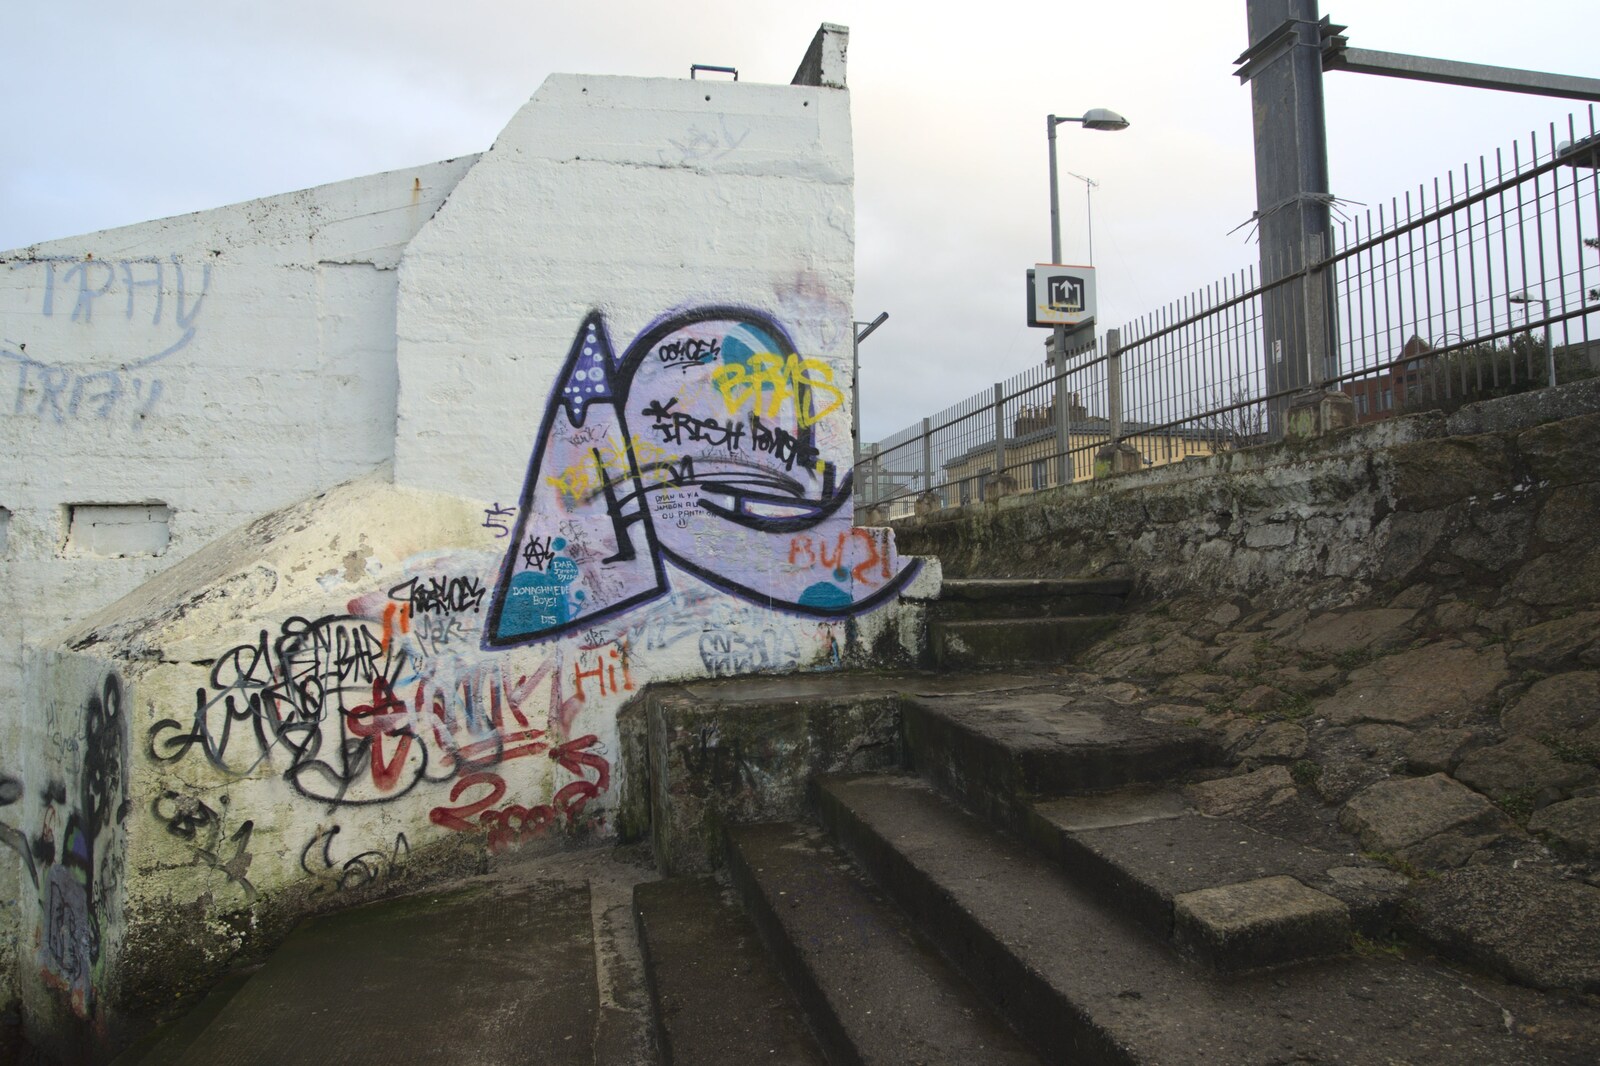 Looking up at the station from Monkstown Graffiti and Dereliction, County Dublin, Ireland - 26th December 2009